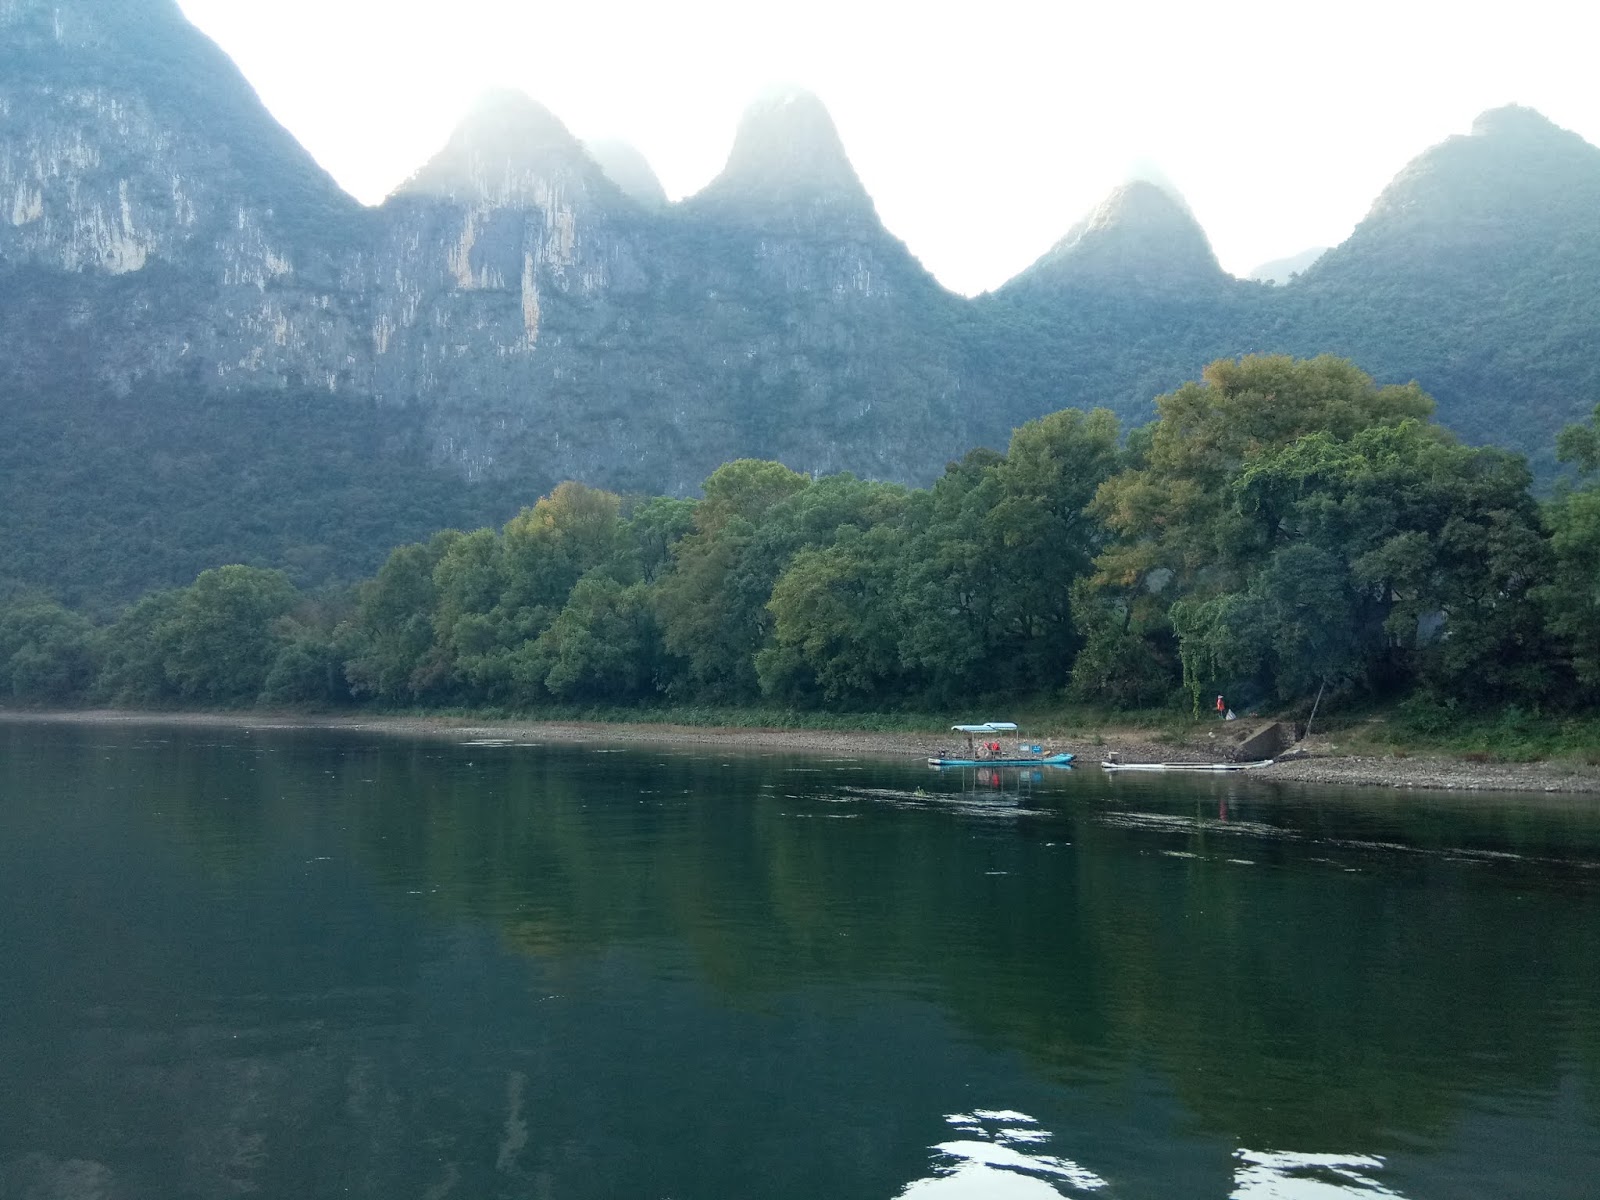 The Nature of Guilin